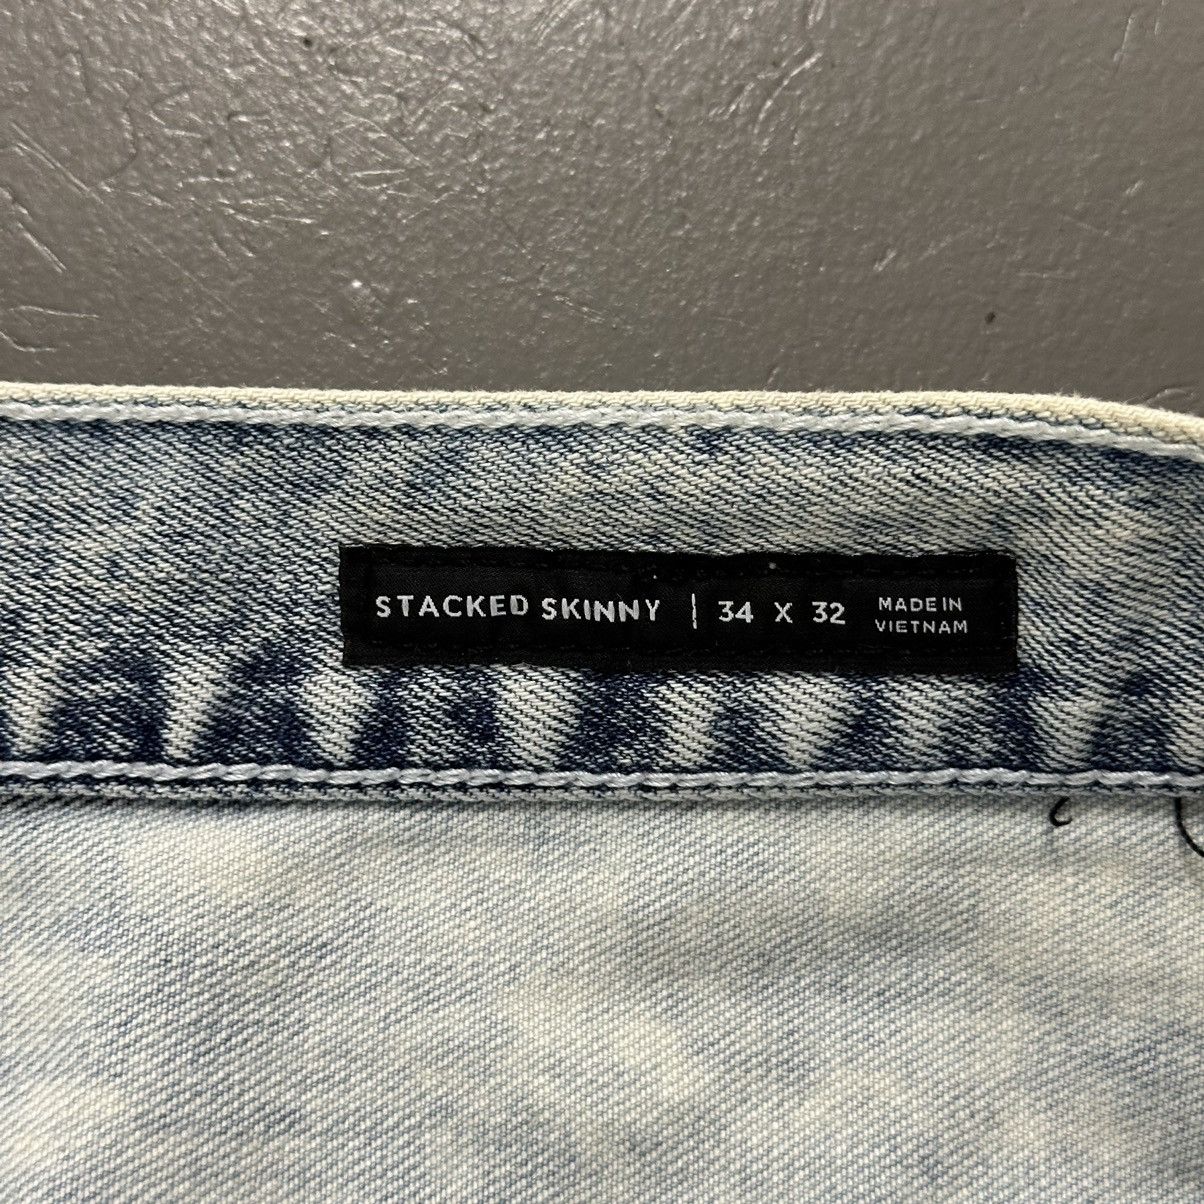 Pacsun Stacked Skinny Denim Jeans 34x32 - 8